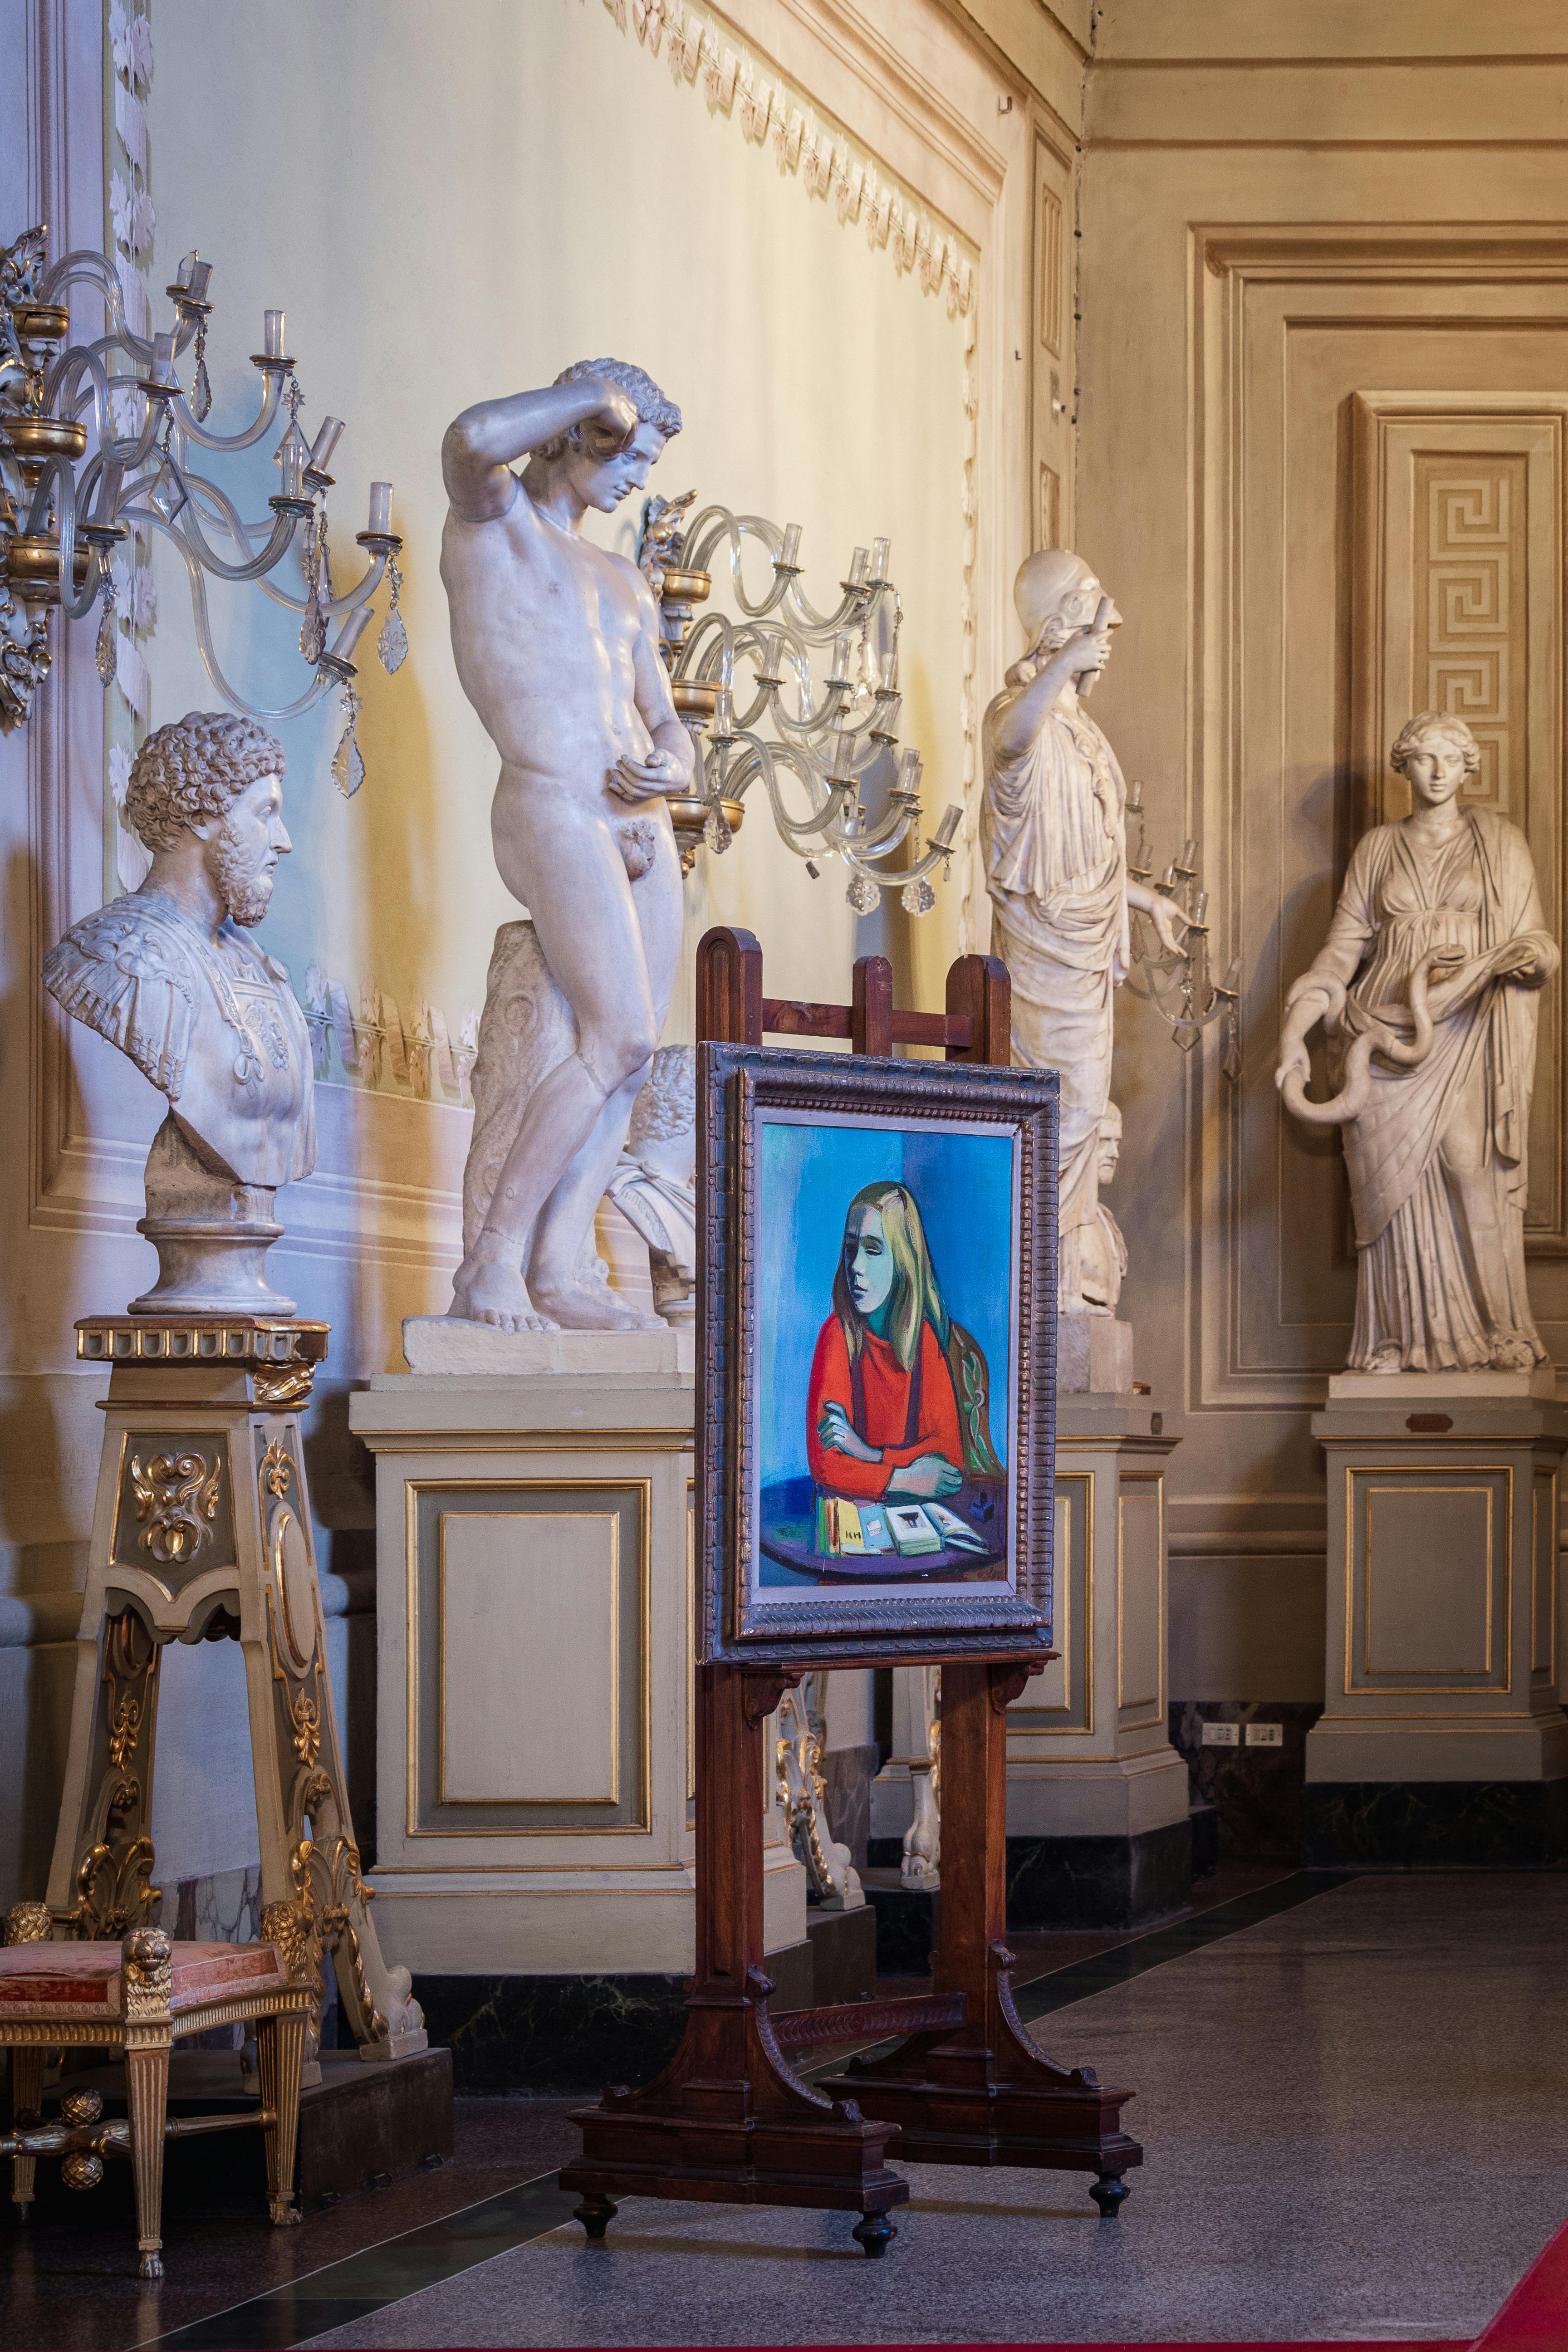 The Uffizi Galleries announce the acquisition of a painting by the German artist Rudolf Levy, deported to Auschwitz